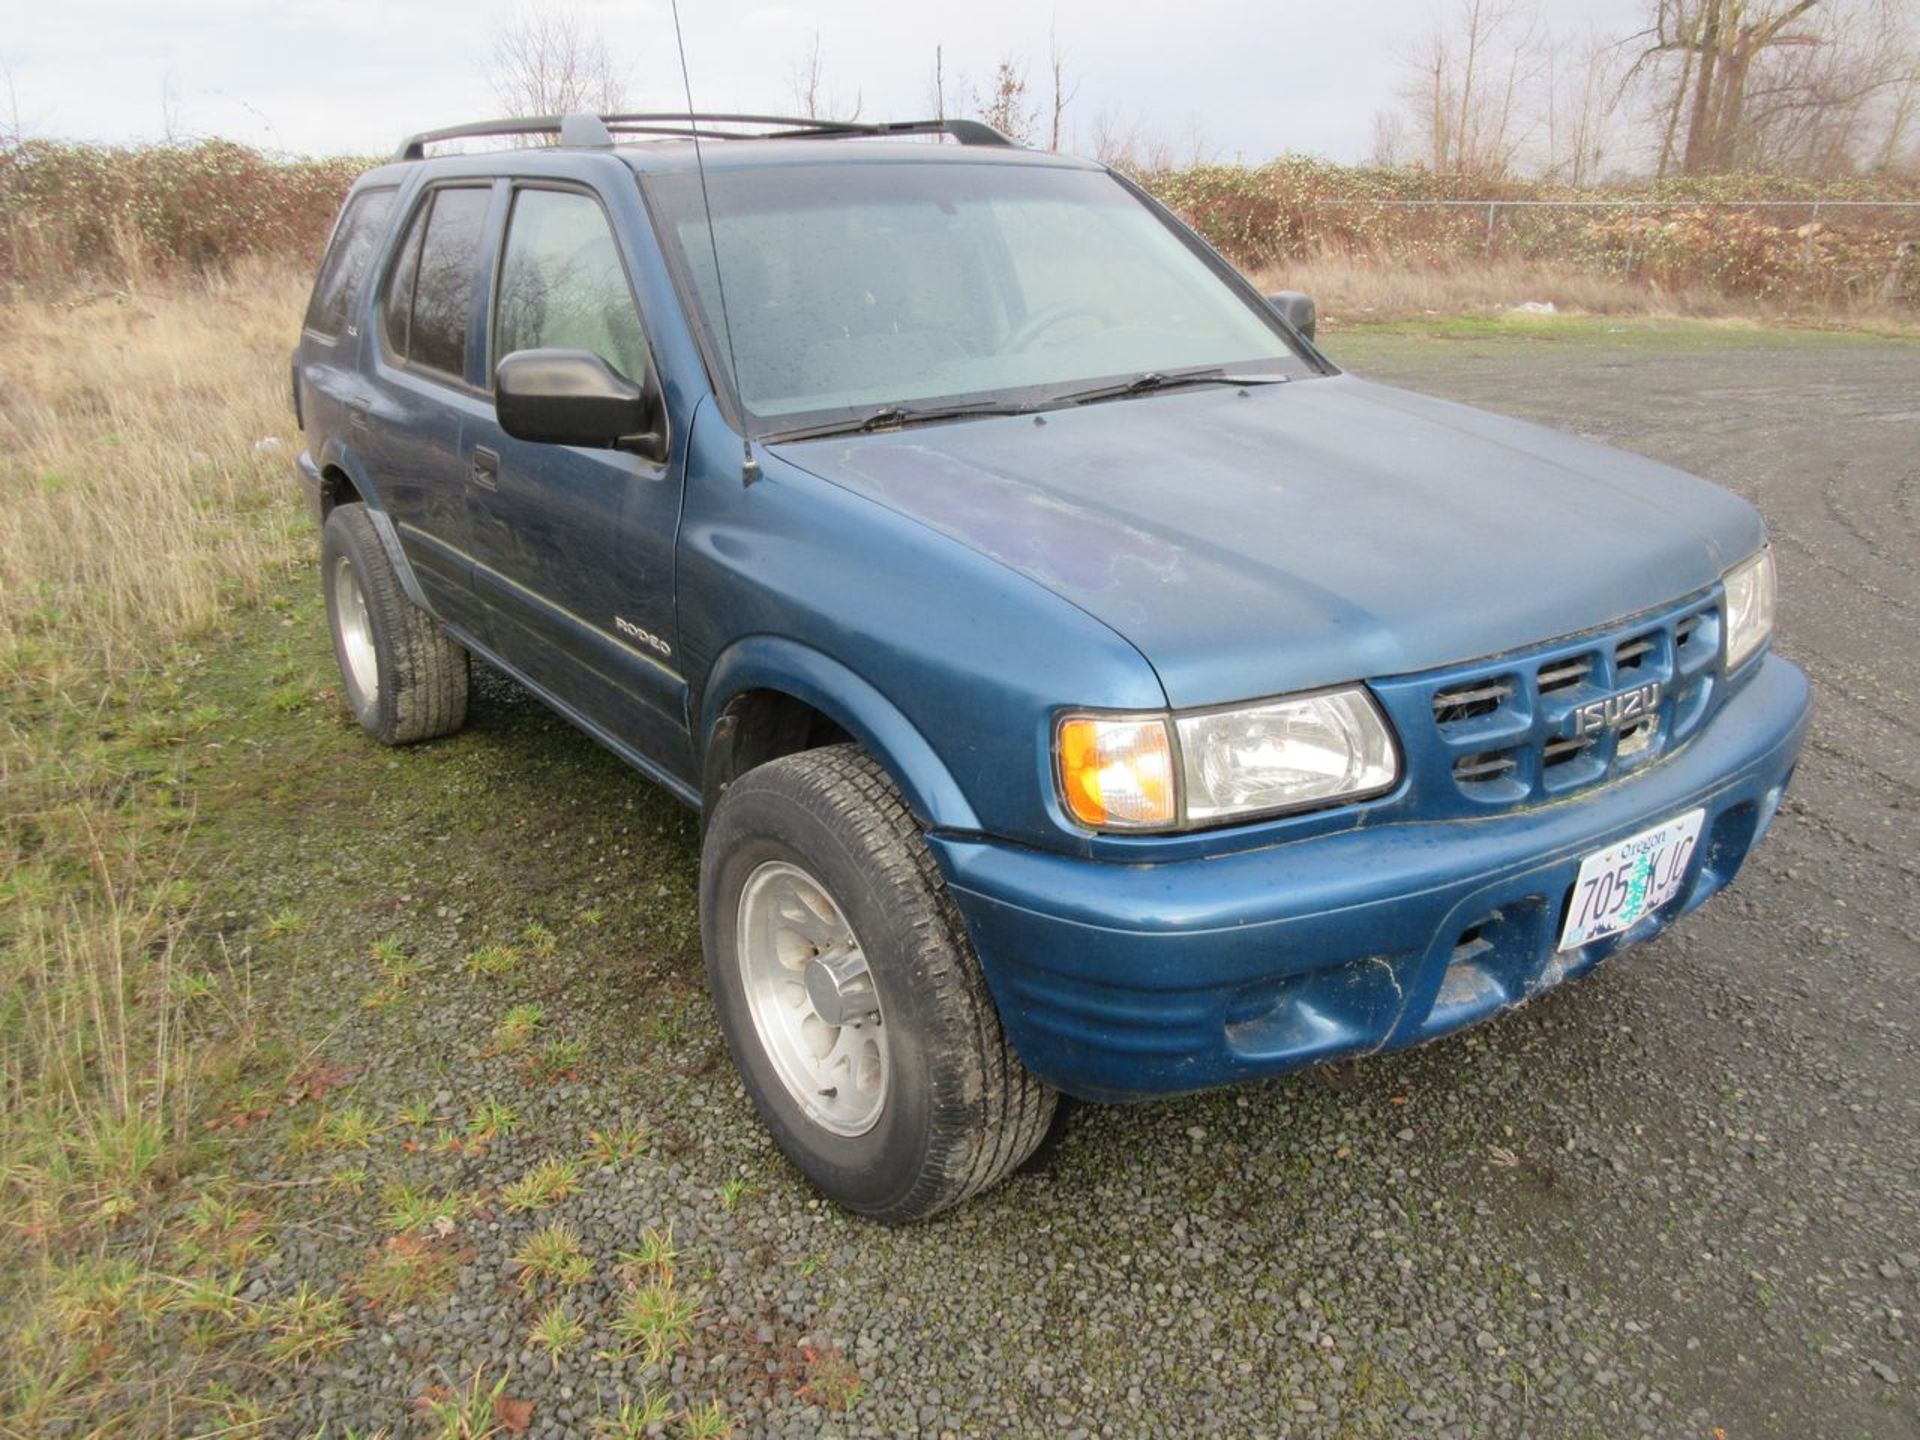 Isuzu Rodeo LS 4-Door Sports Utility Vehicle, VIN: 4S2CK58W914361609 (2001); with V6 Gas Engine, - Image 2 of 7